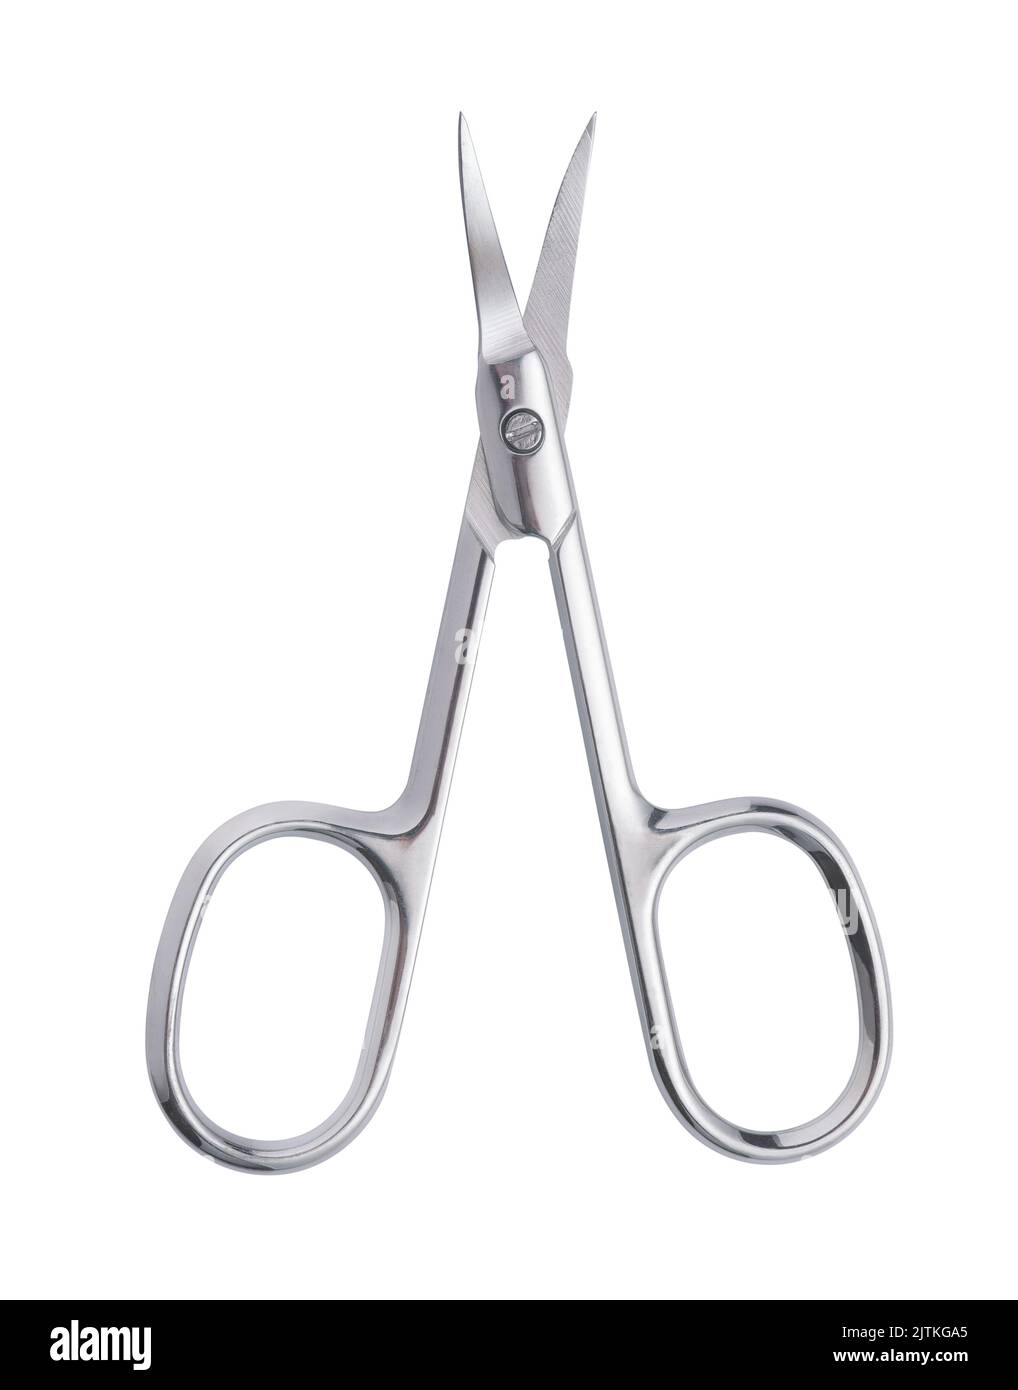 Front view of stainless steel manicure scissors isolated on white Stock Photo